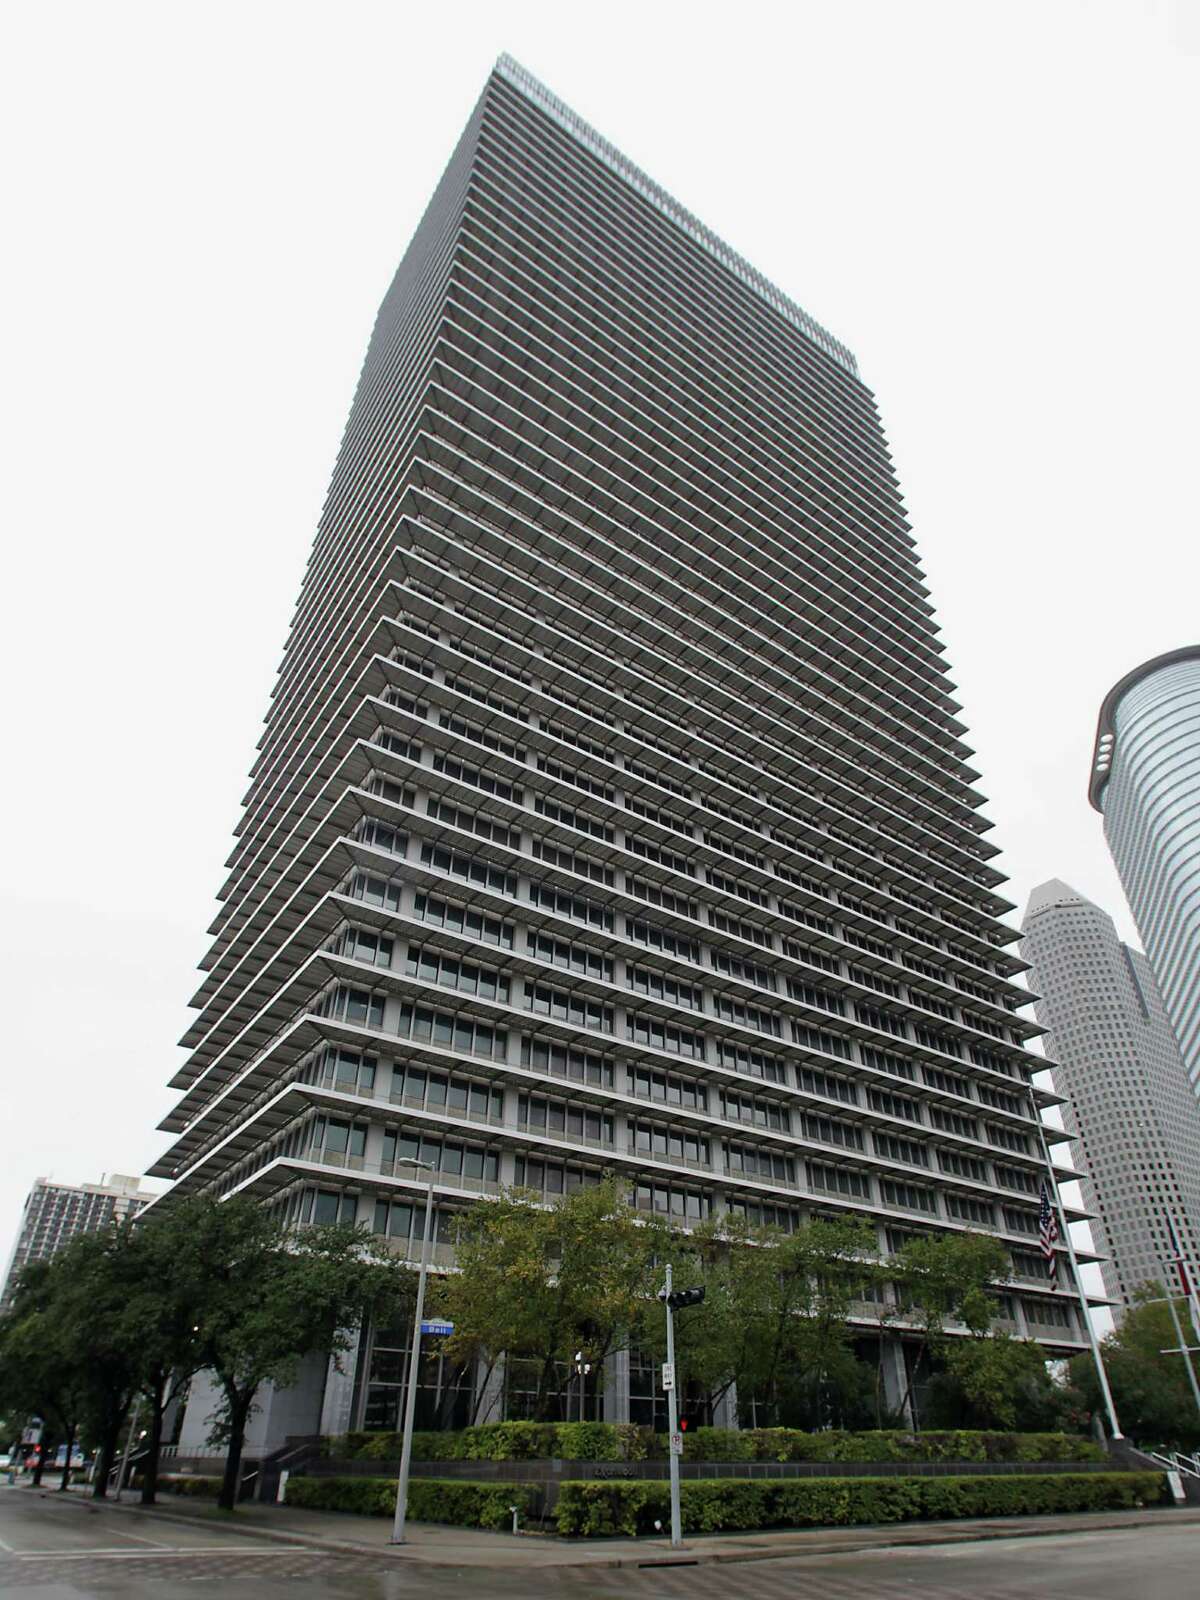 The ExxonMobil building at 800 Bell was built in the 1960s.